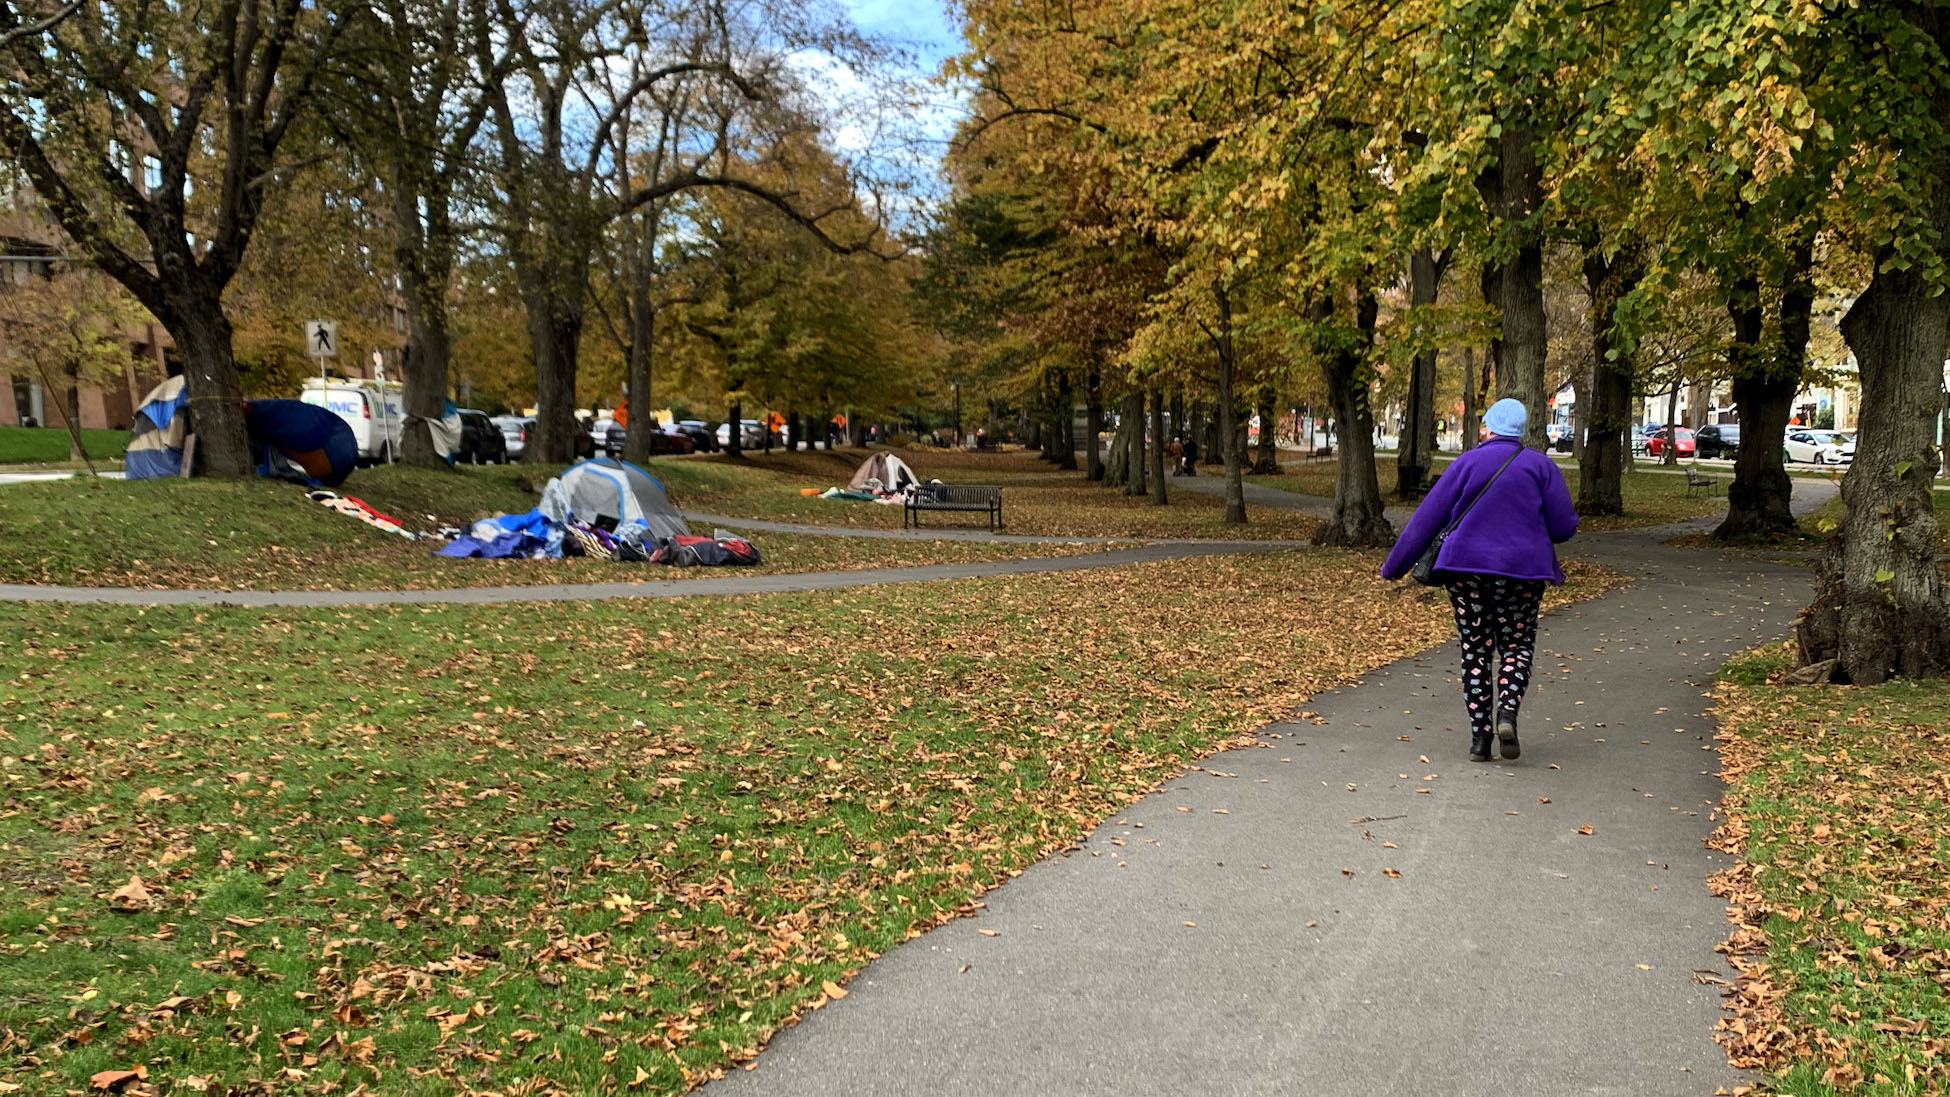 A woman walks past a tent encampment in Victoria Park on Nov. 8, one of several tent communities in HRM.